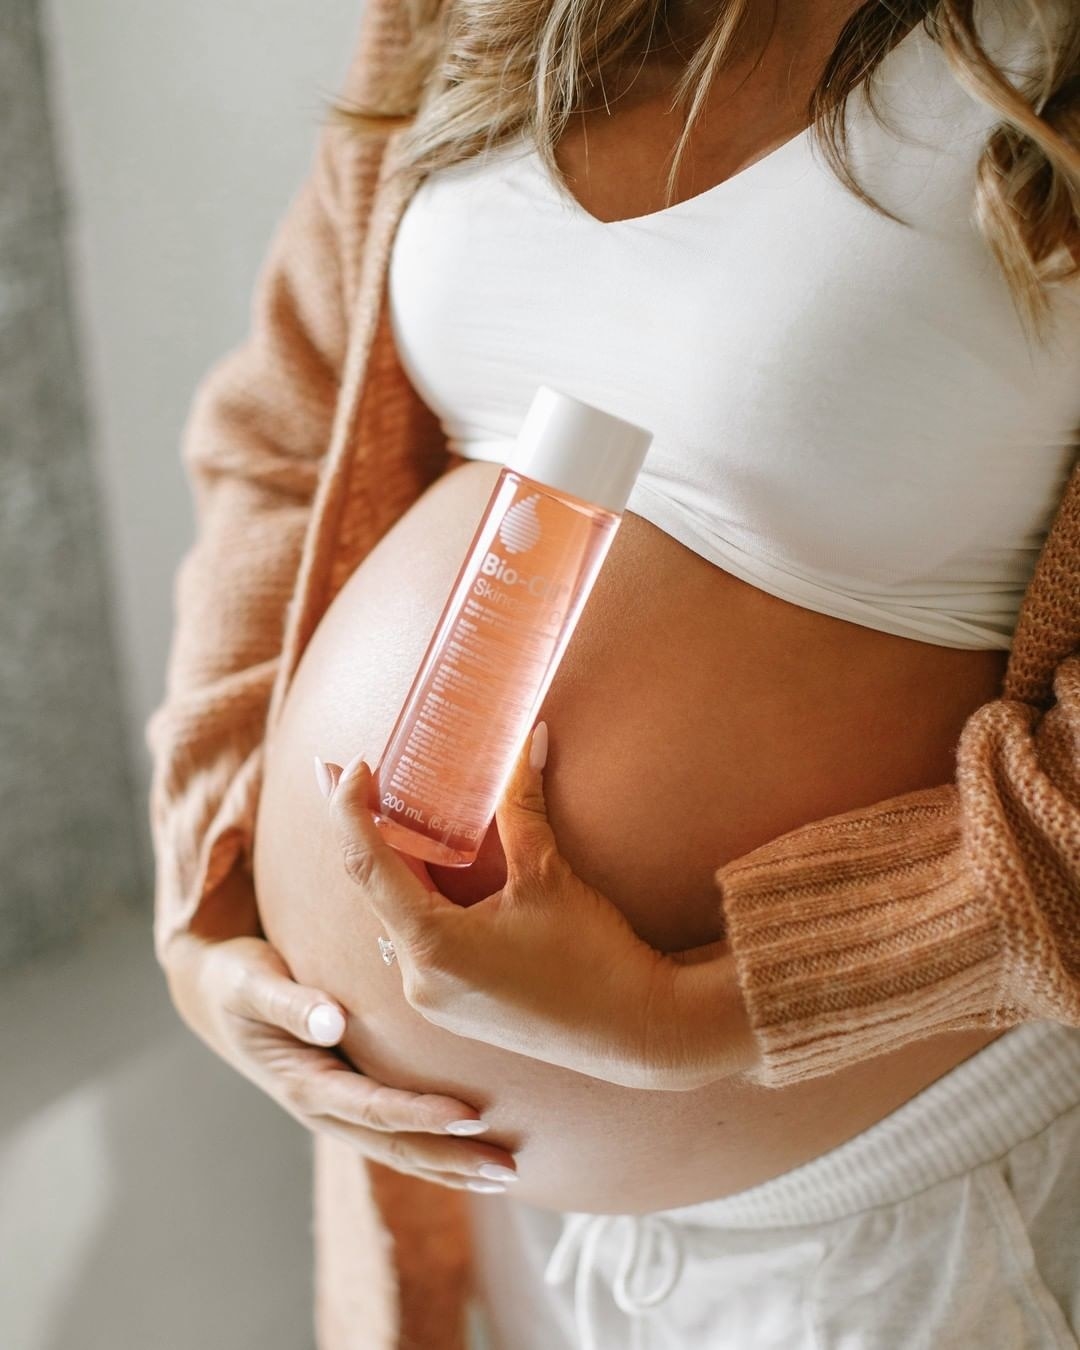 A person holding a bottle of Bio-Oil next to their bump